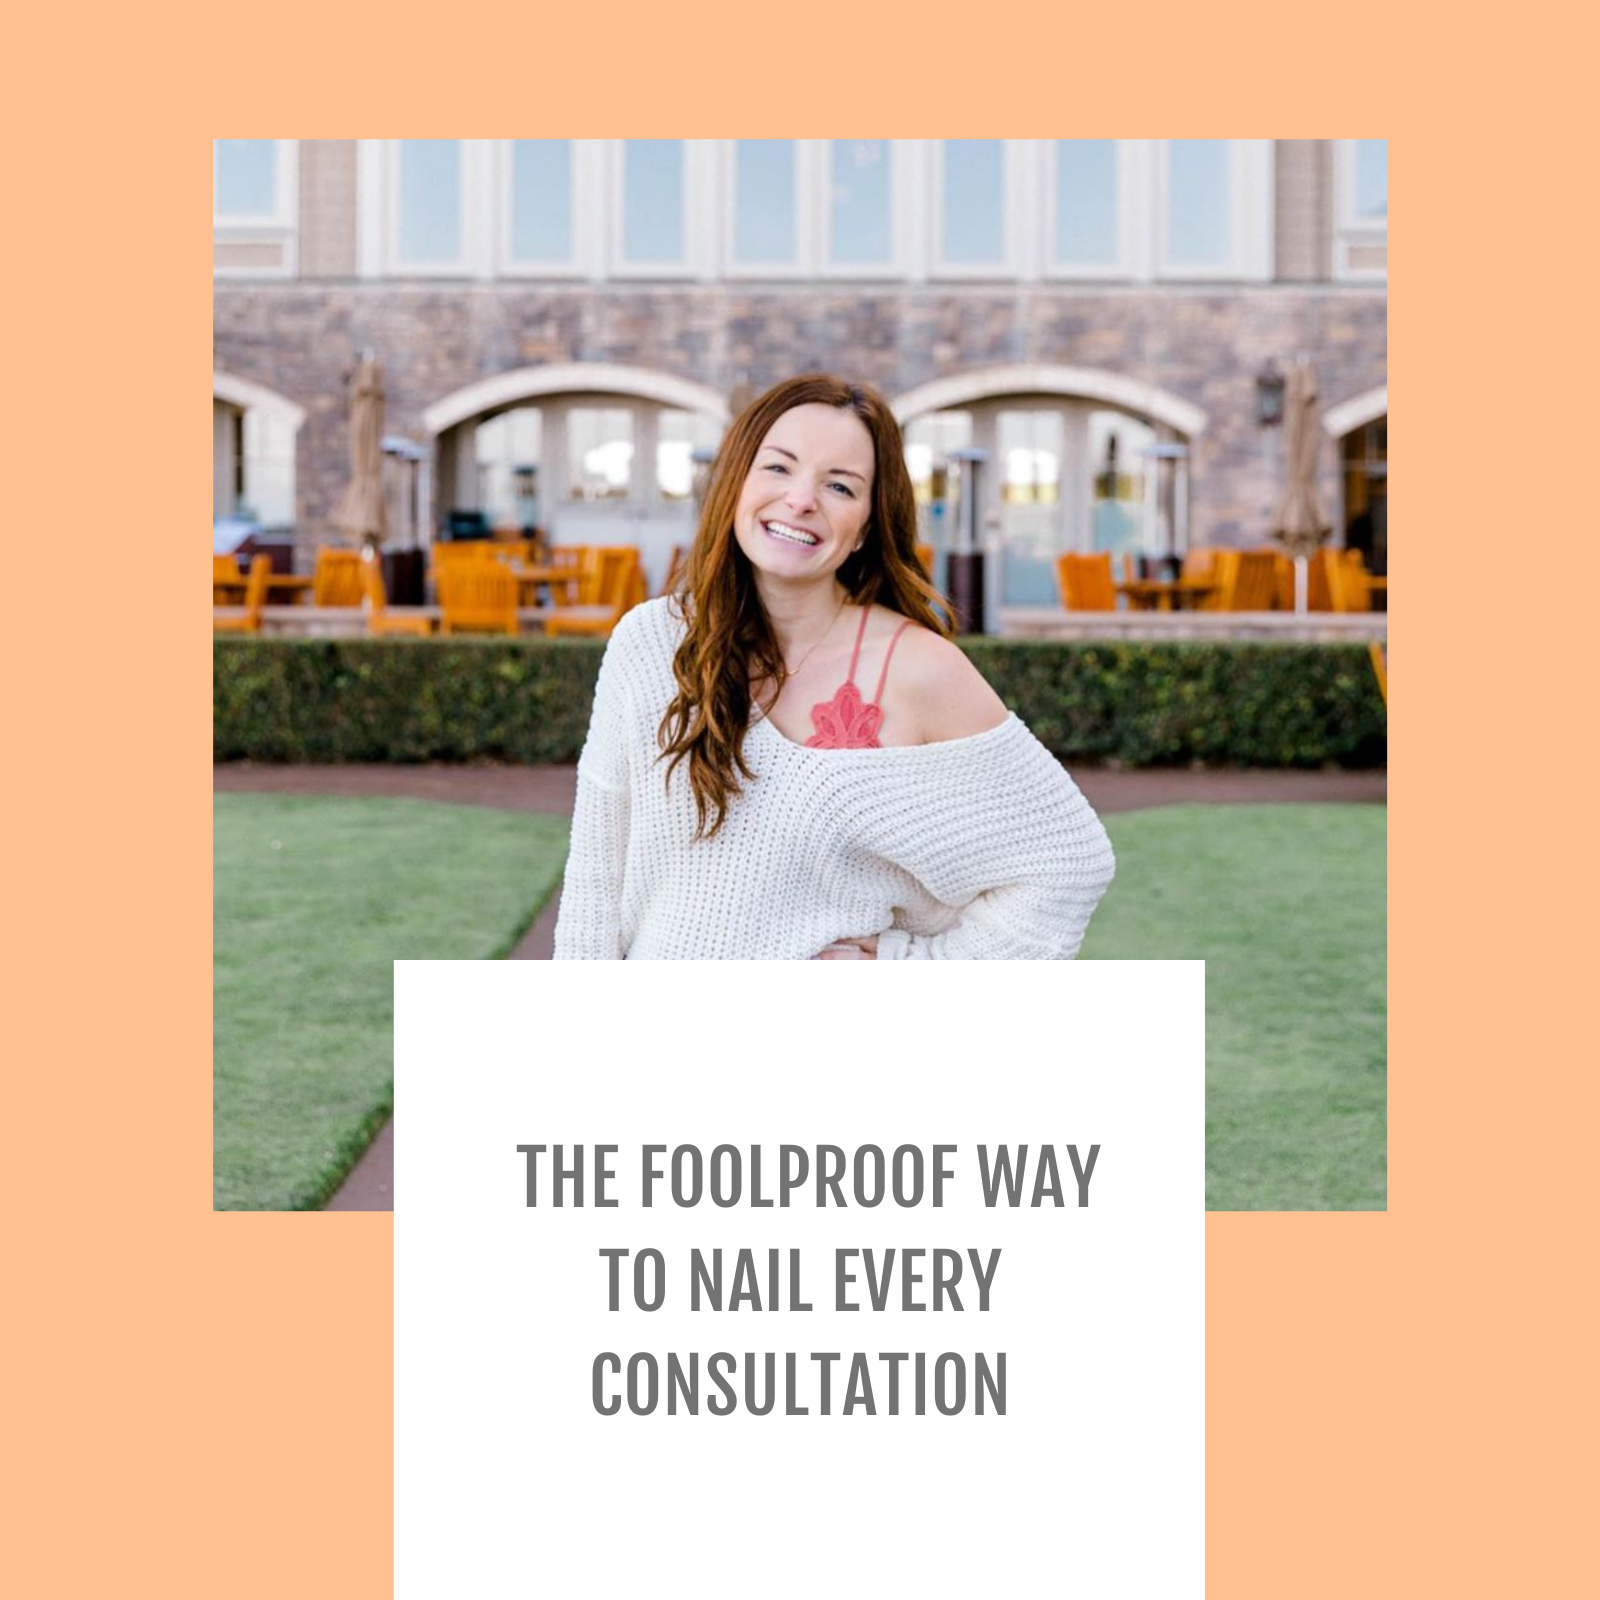 Episode #012 - The foolproof way to nail every consultation